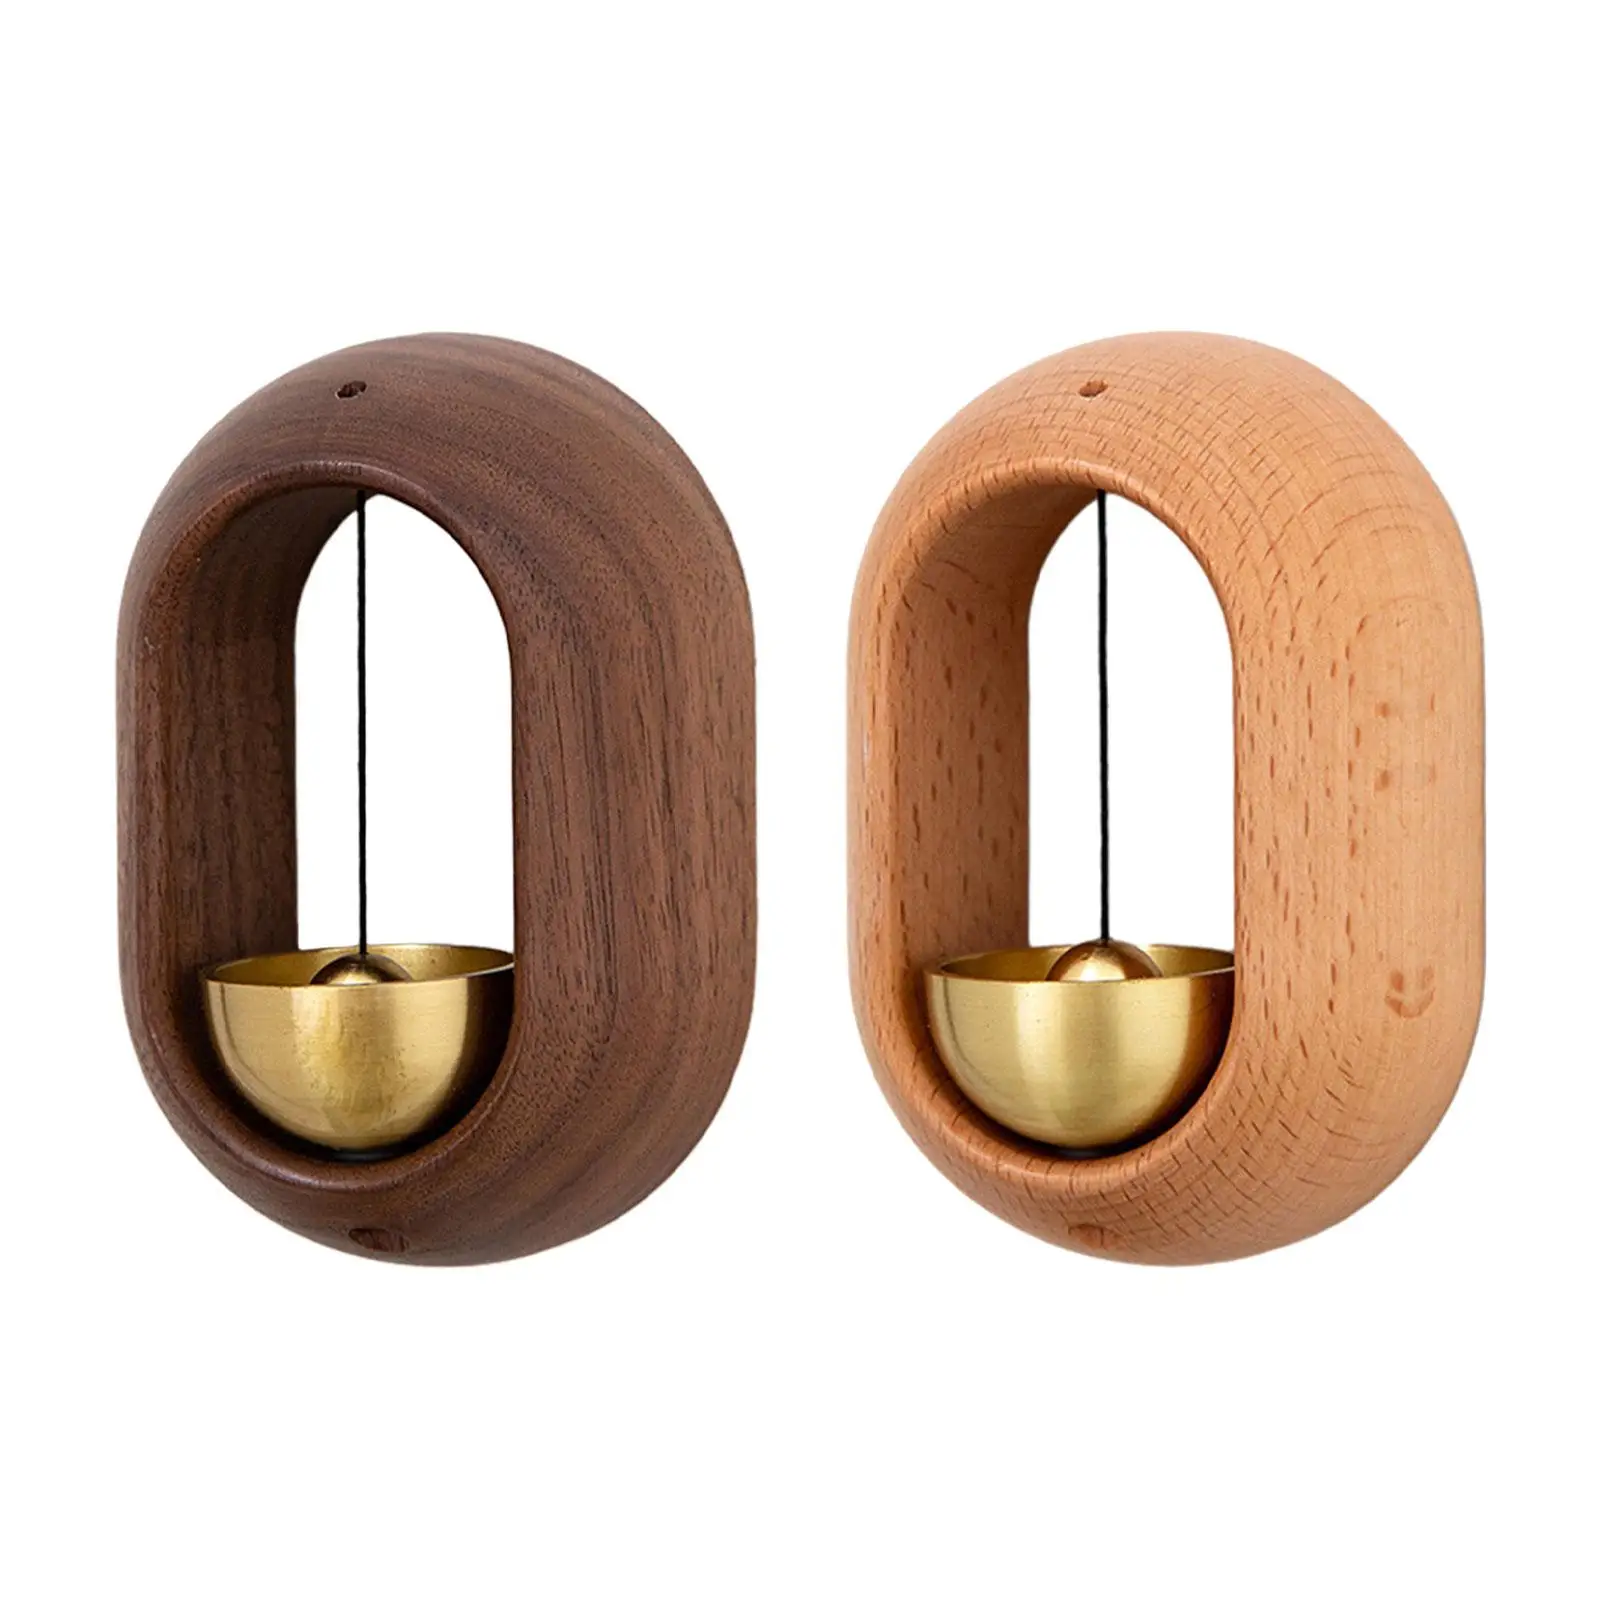 

Shopkeepers Bell Japanese Style Wood Decoration Entrance Doorbells for Office Business Office Door Opening Entrance